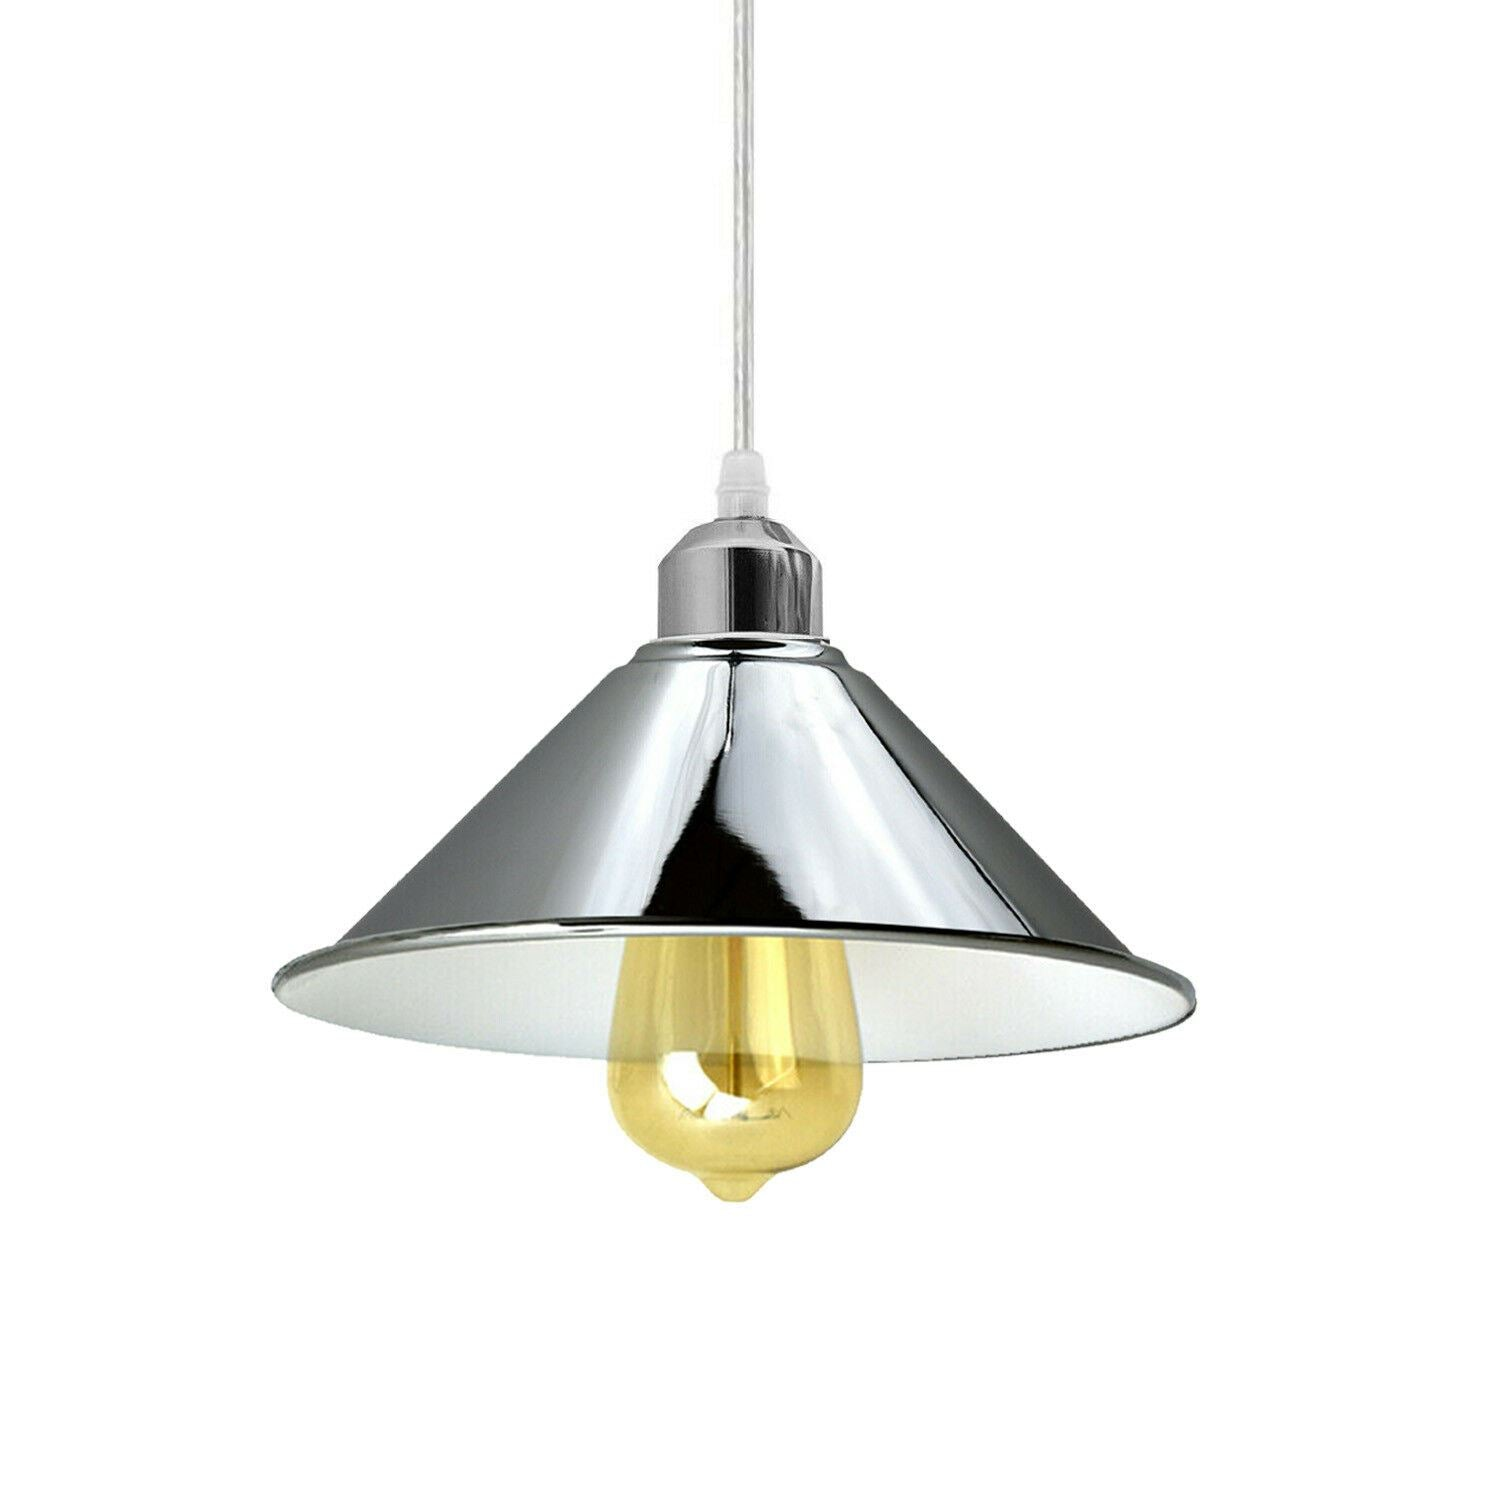 Modern Industrial Chrome 3 Way Ceiling Pendant Light Metal Cone Shape Shade Indoor Hanging Lighting For Bedroom, Dining Room, Living Room~1183